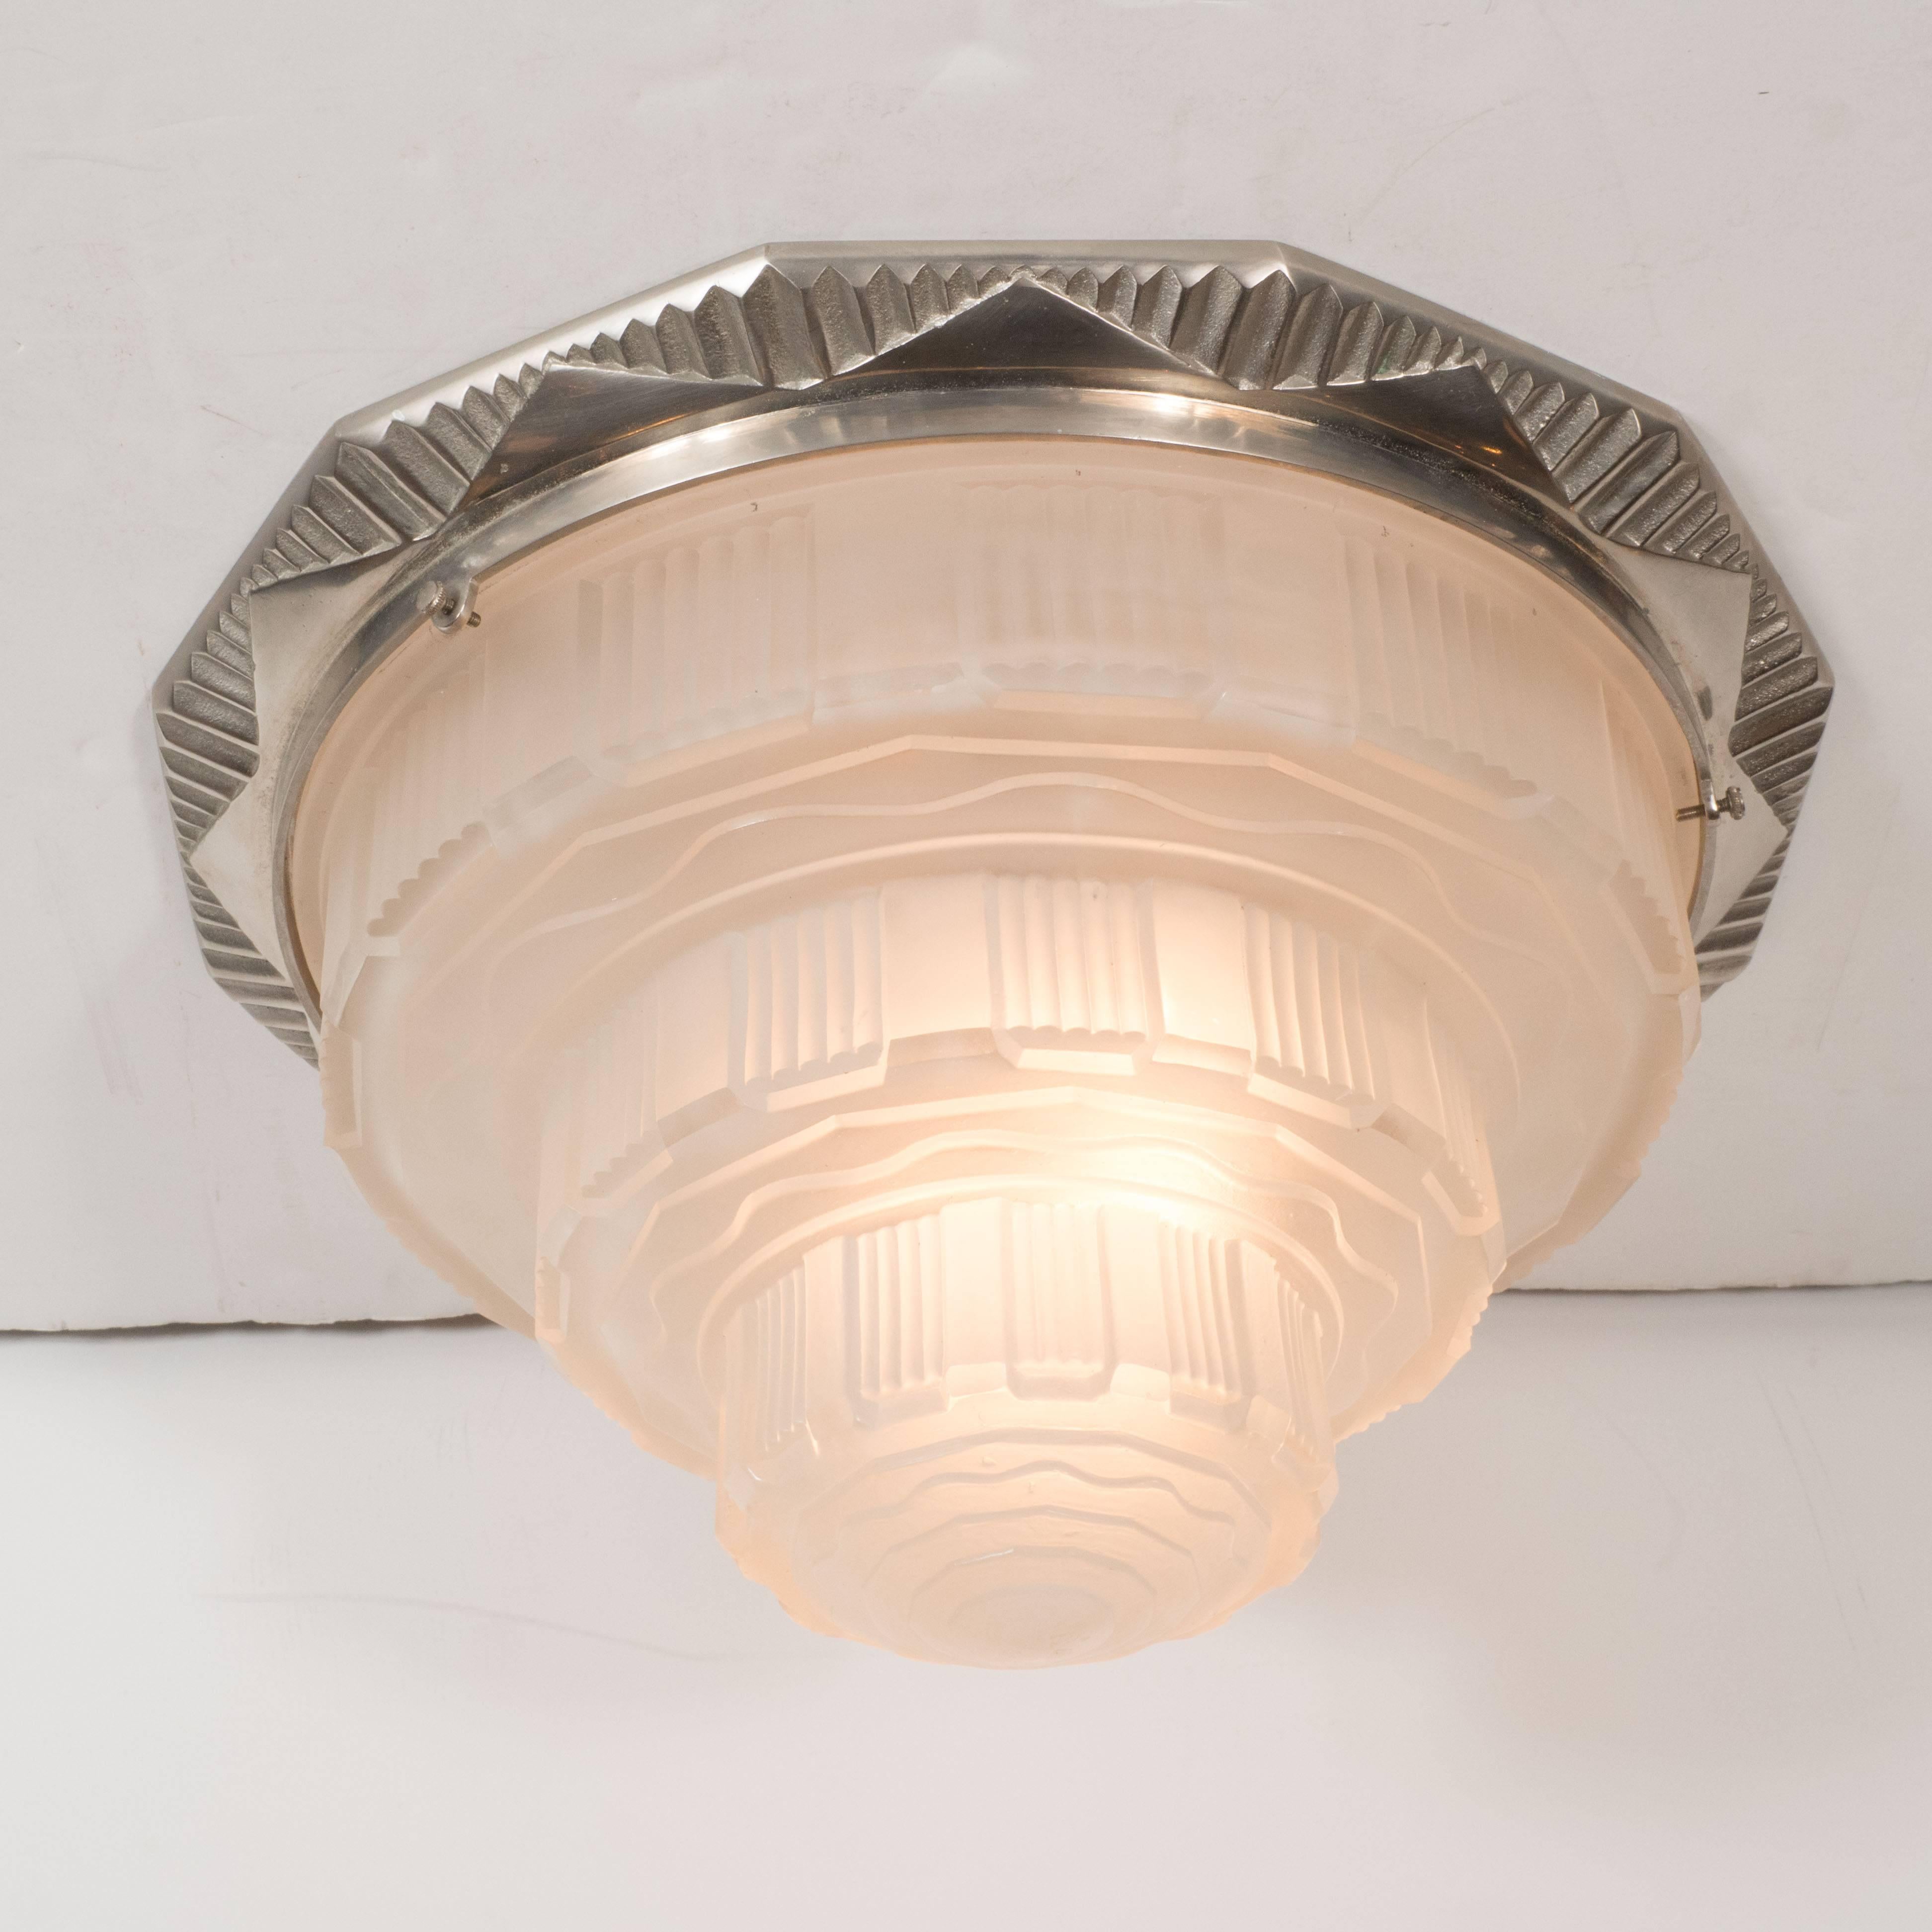 This elegant skyscraper style flush mount was realized in France, circa 1930 by the celebrated atelier Gênet et Michon. It features a nickel plated bronze base with sunburst striations and pyramidal geometric forms circumscribing the perimeter.